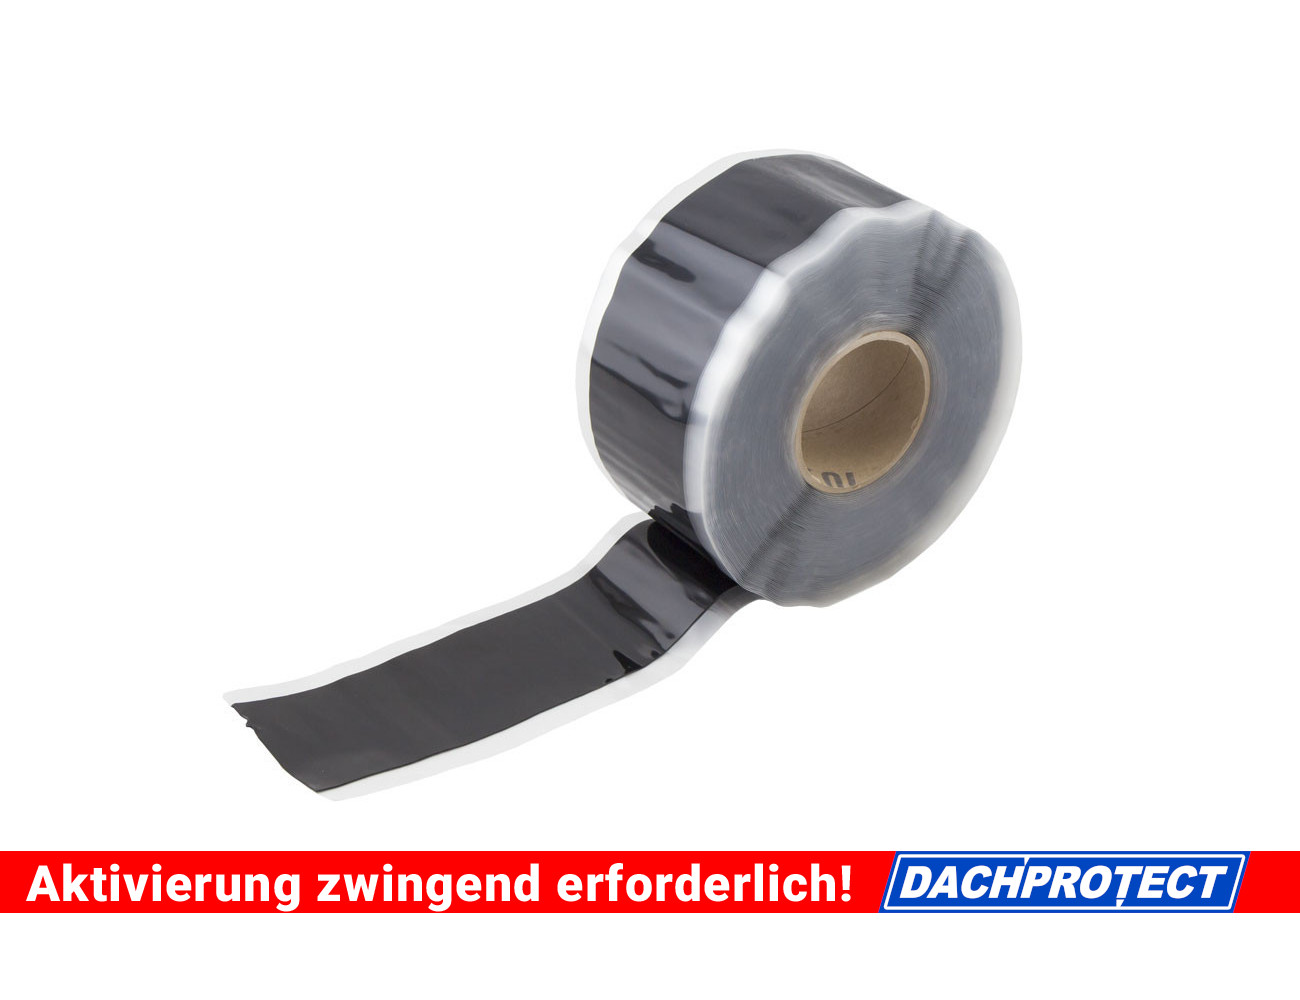 DACHPROTECT Nahtband 7,5 cm breit (Rolle 30,5 m)